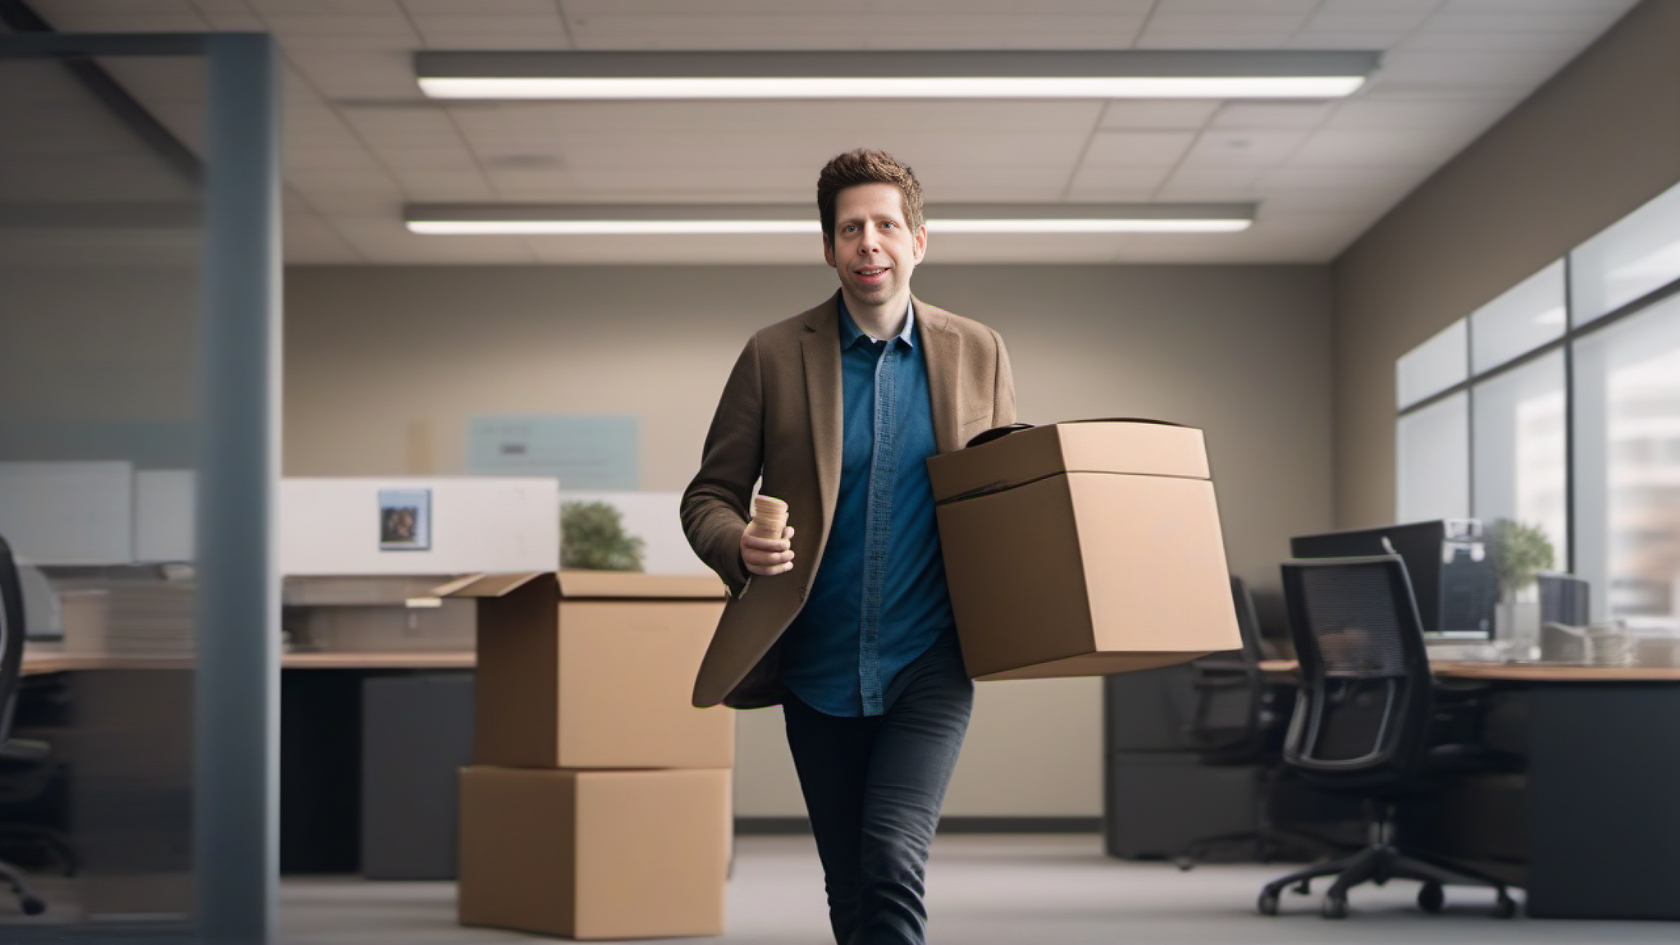 A man walking through an office with boxes.